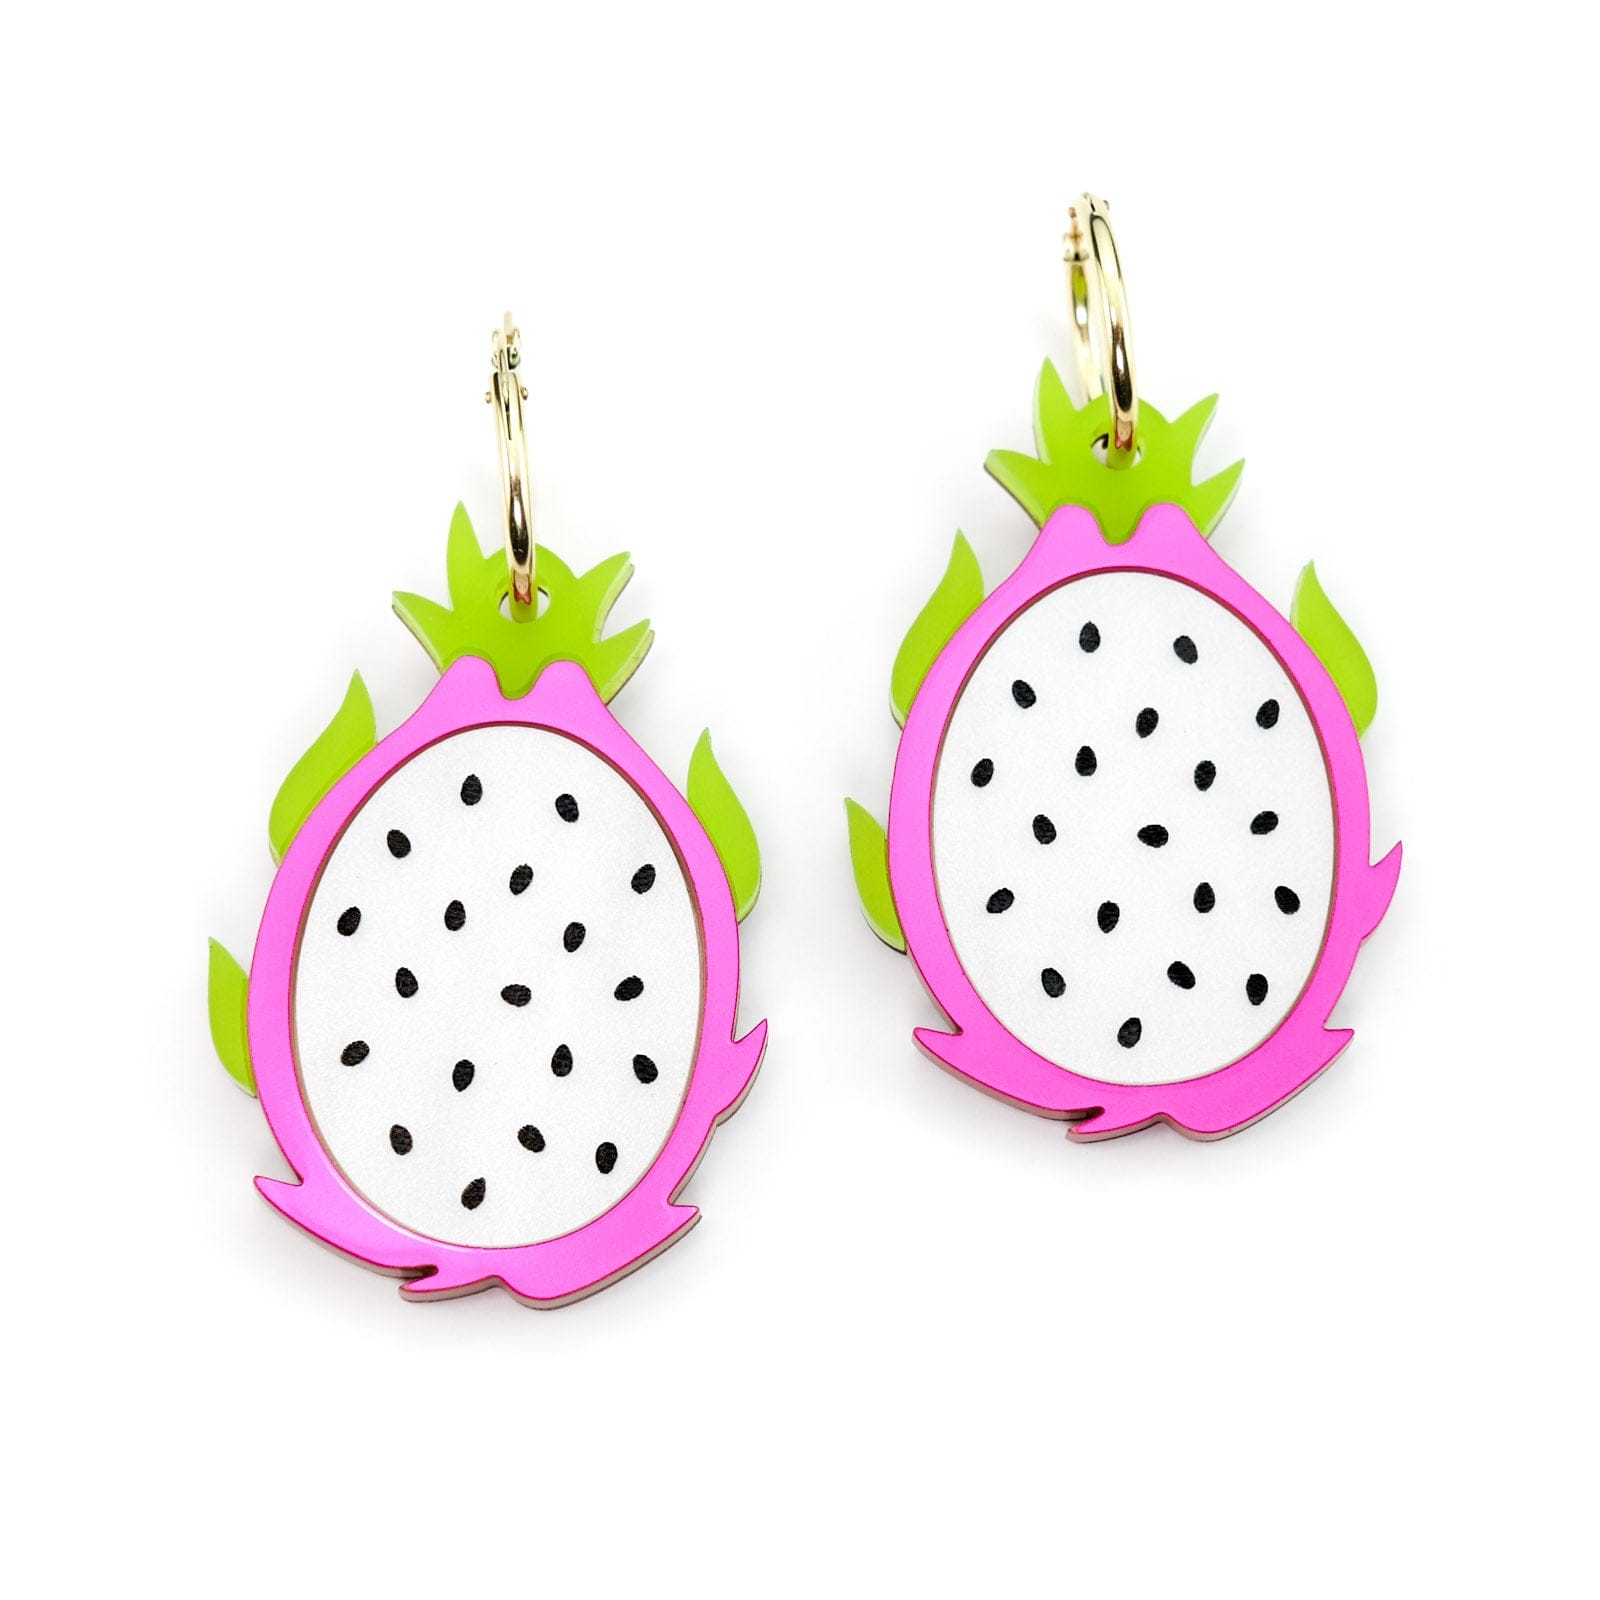 Dragonfruit dangly earrings with gold-filled hoops